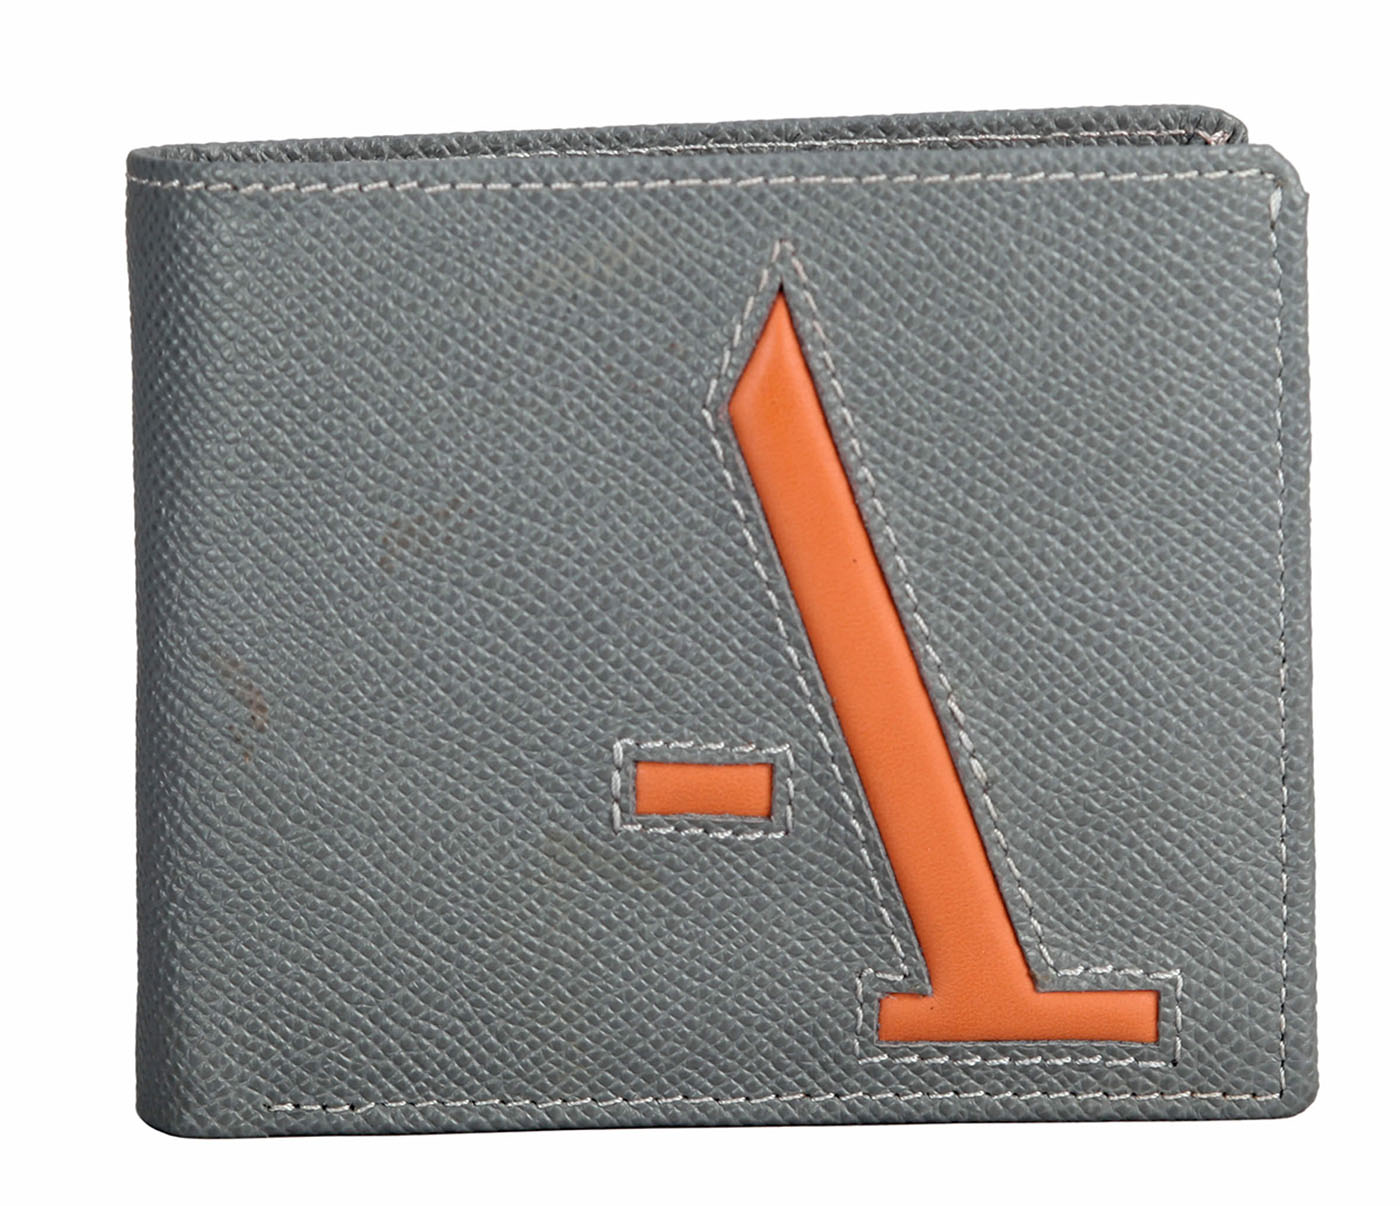 W310-Addler-Men's bifold wallet with coin pocket in Genuine Leather - Grey